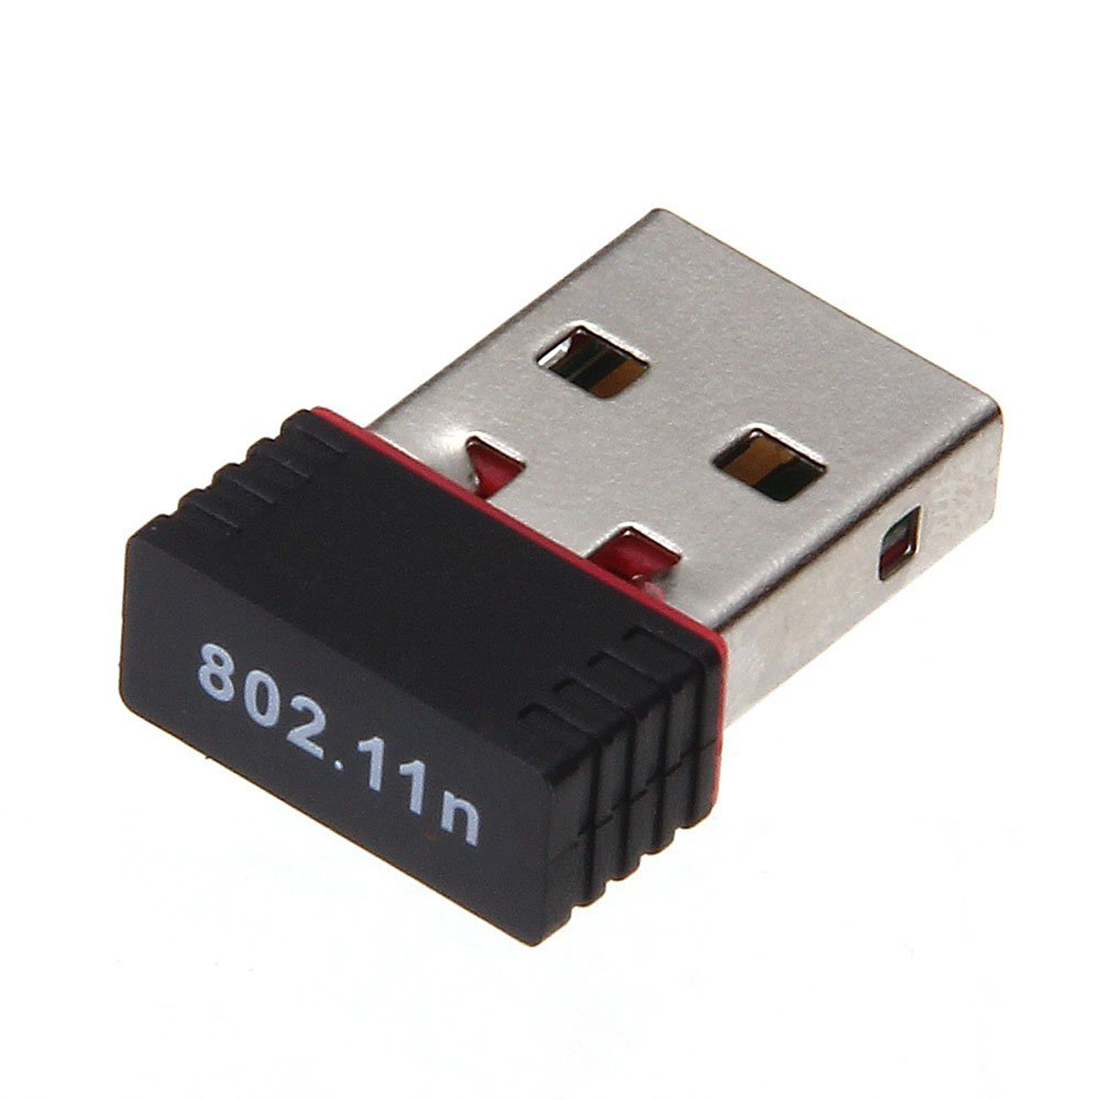 Ralink USB Devices Driver Download For Windows